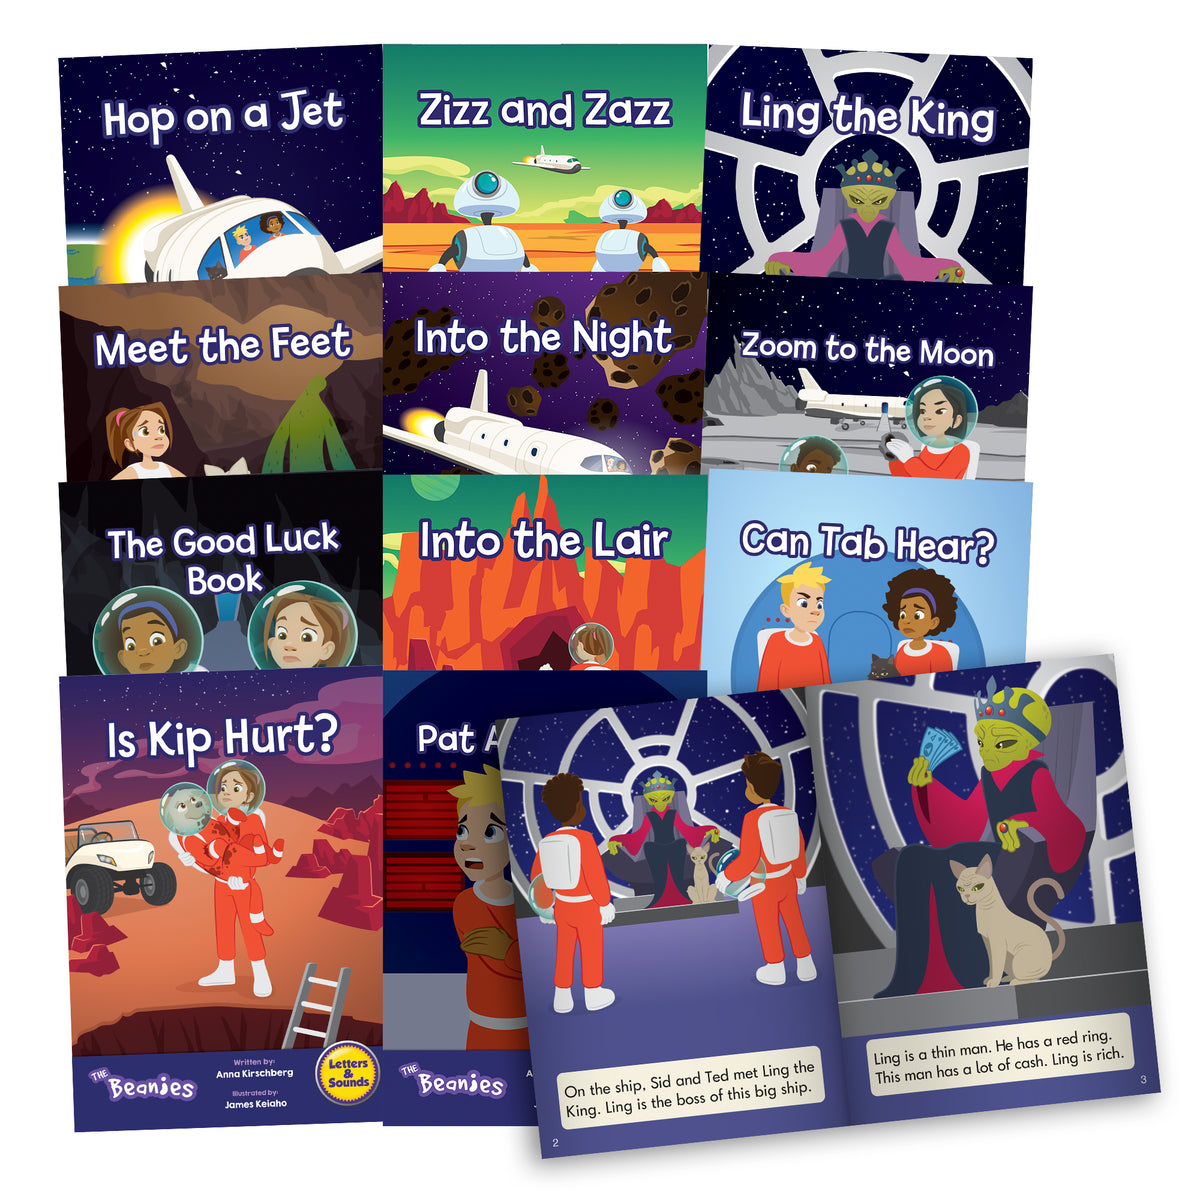 Letters & Sounds Phase 3 Classroom Kit